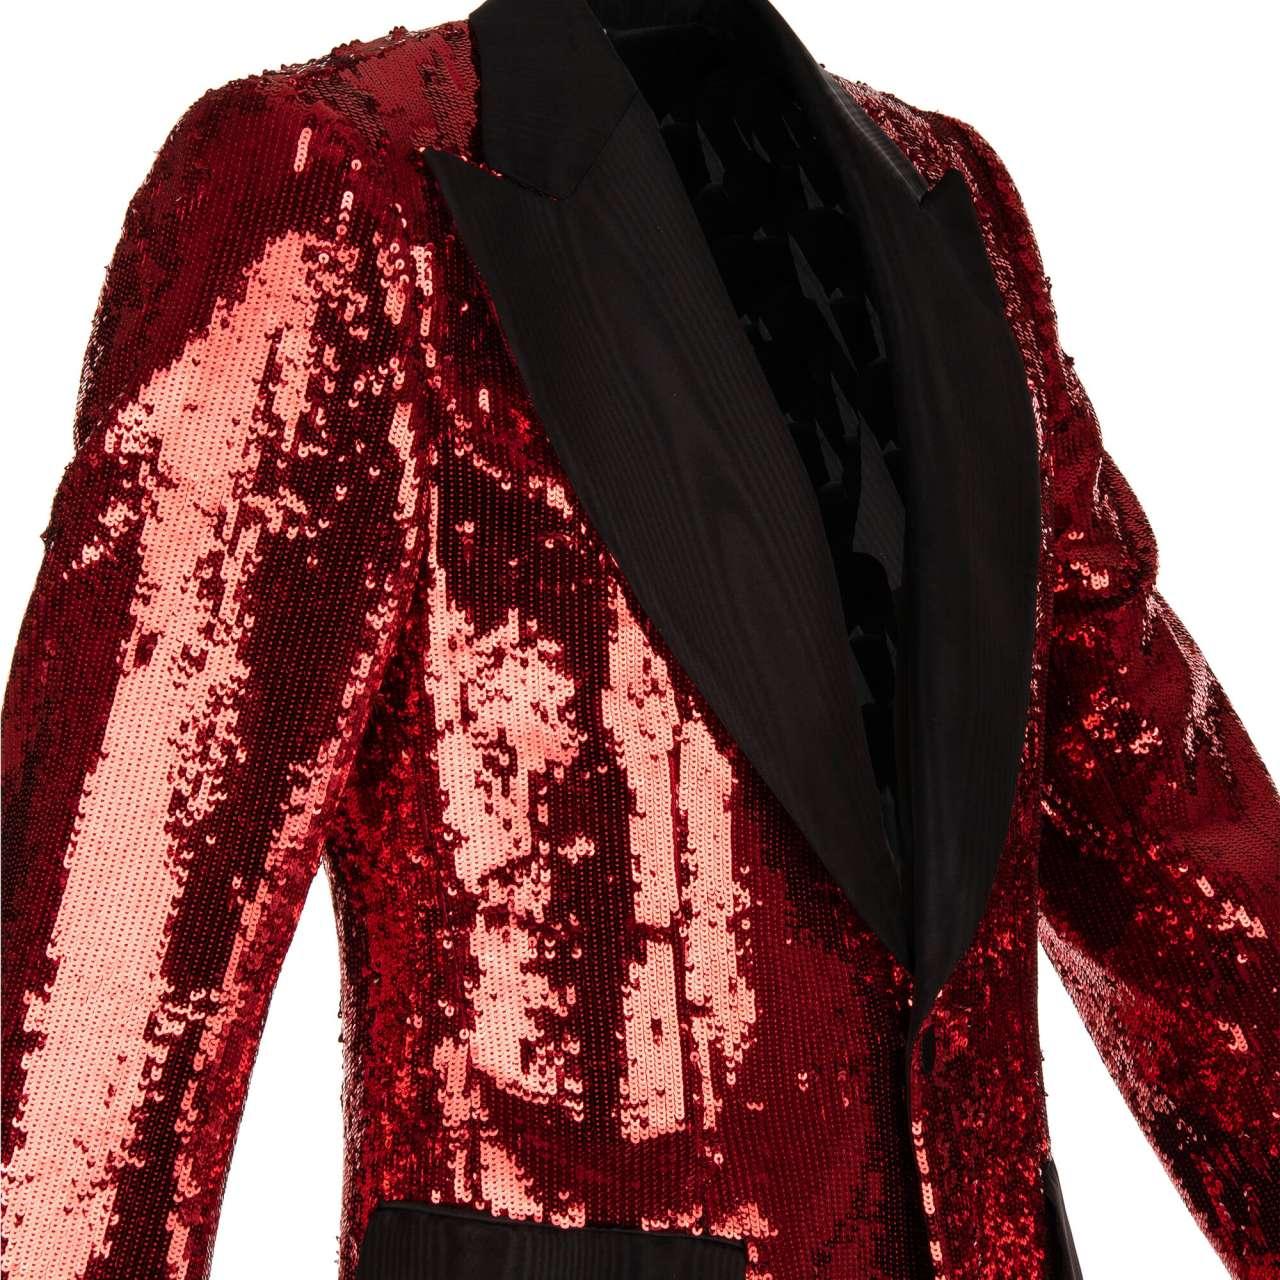 Dolce & Gabbana - Sequined Tuxedo Blazer with Moire Lapel Red Black 58 For Sale 1